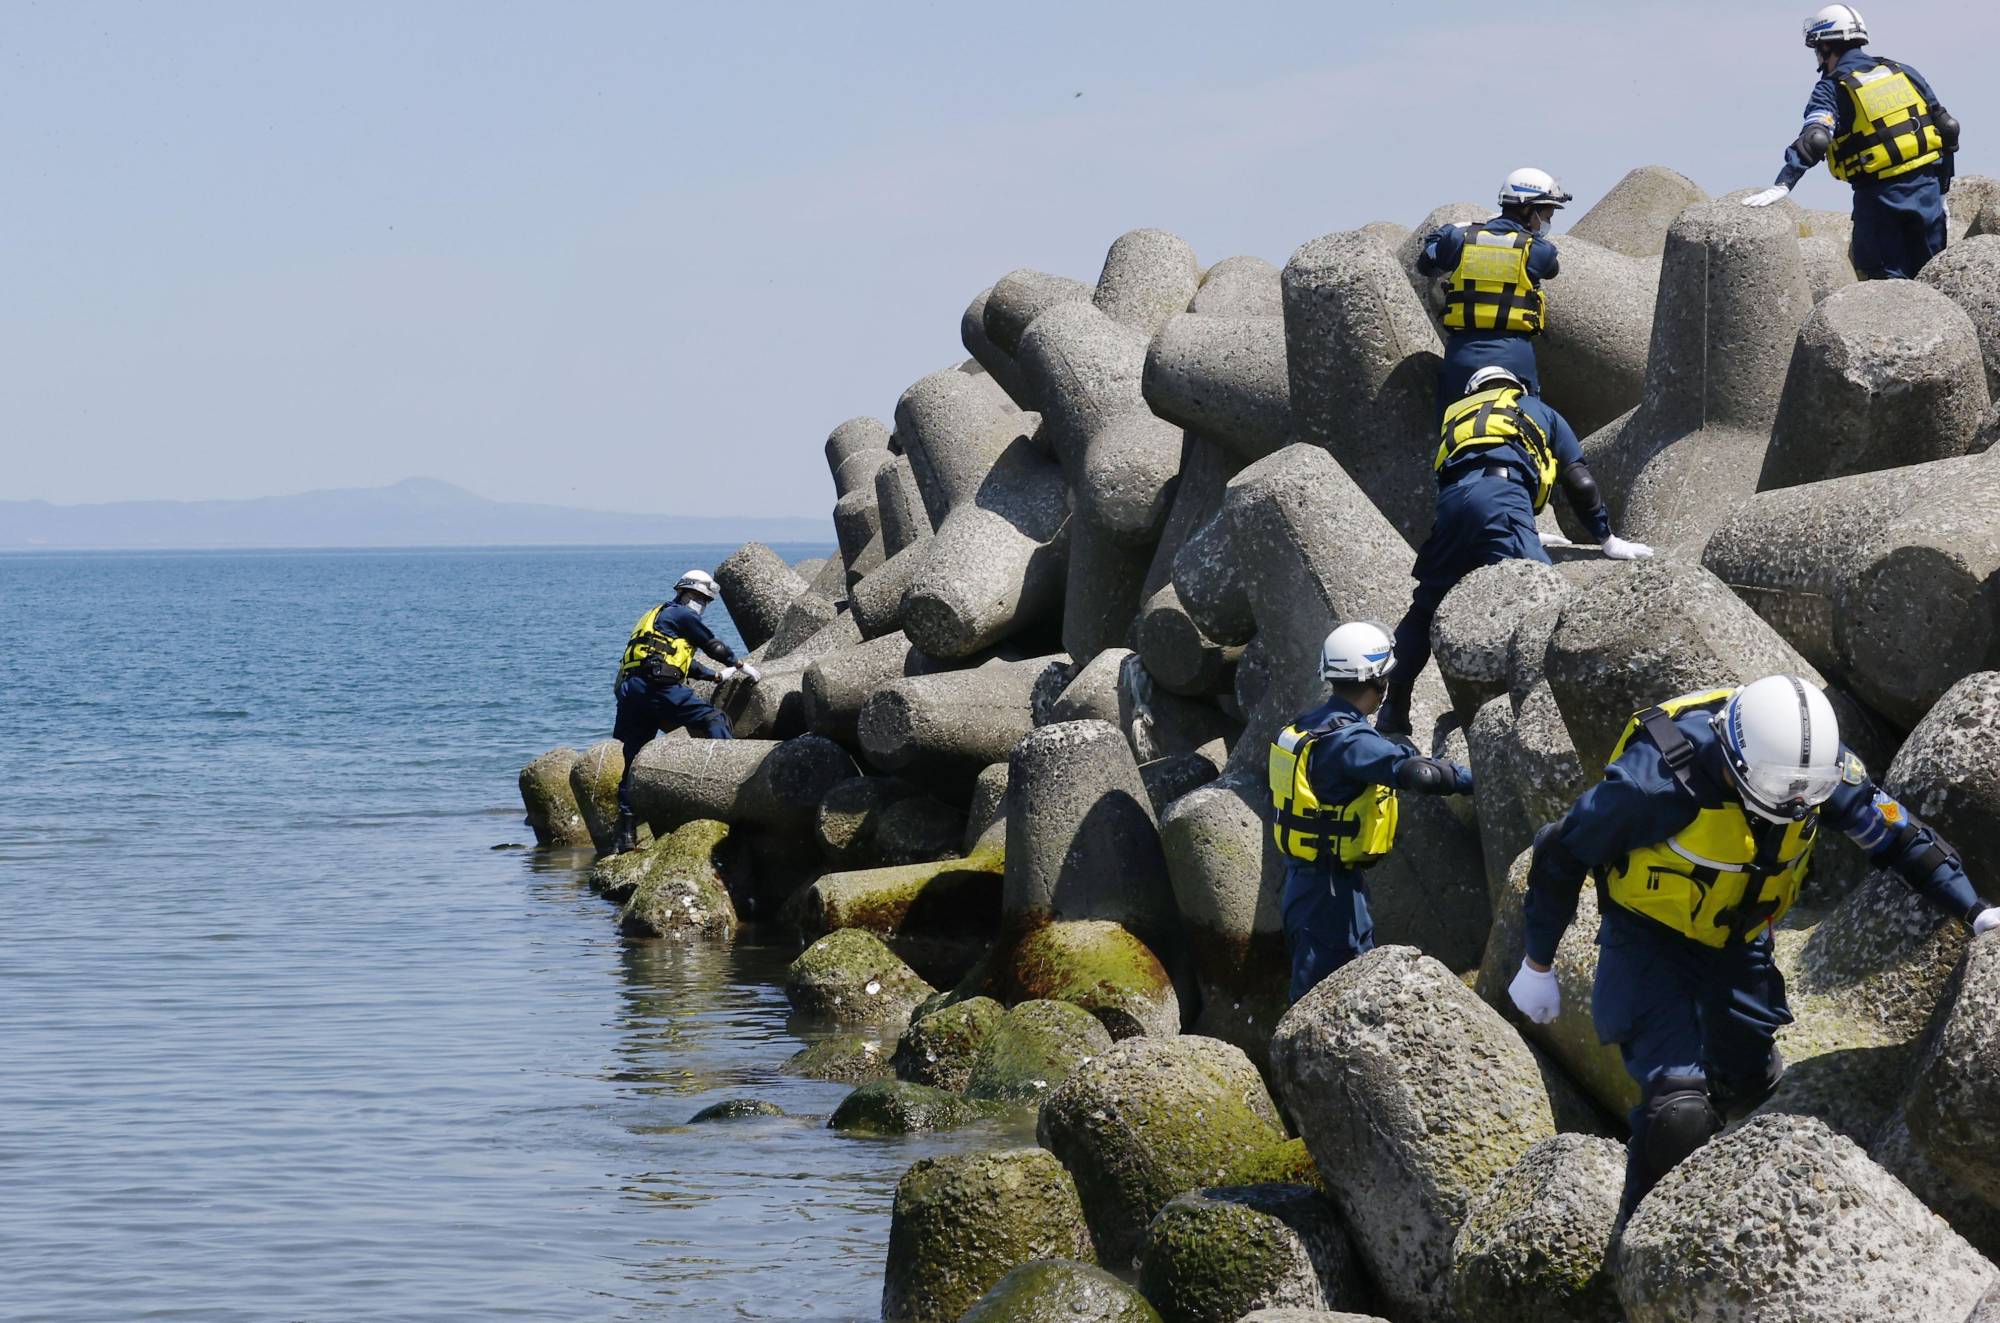 Police officers search coastal areas in Shibetsu, Hokkaido, on May 16, with Kunashiri Island seen in the background, for clues on people who went missing after a tourist boat sank off Hokkaido in April. | KYODO